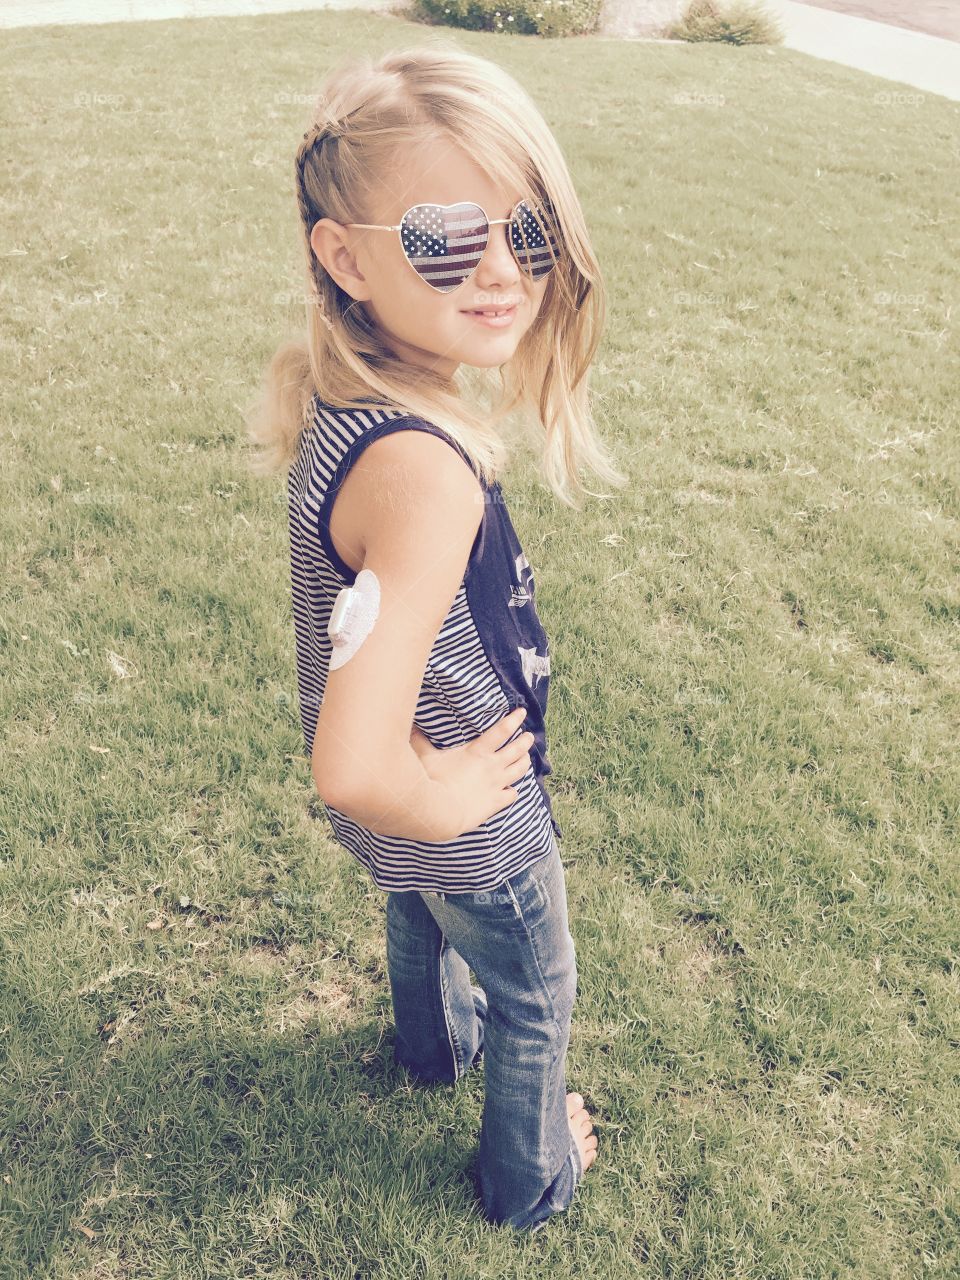 This is Type 1 diabetes. Meet 8 yr old Libby Lou, living with type 1 diabetes since she was 3. She is unstoppable, no matter what.